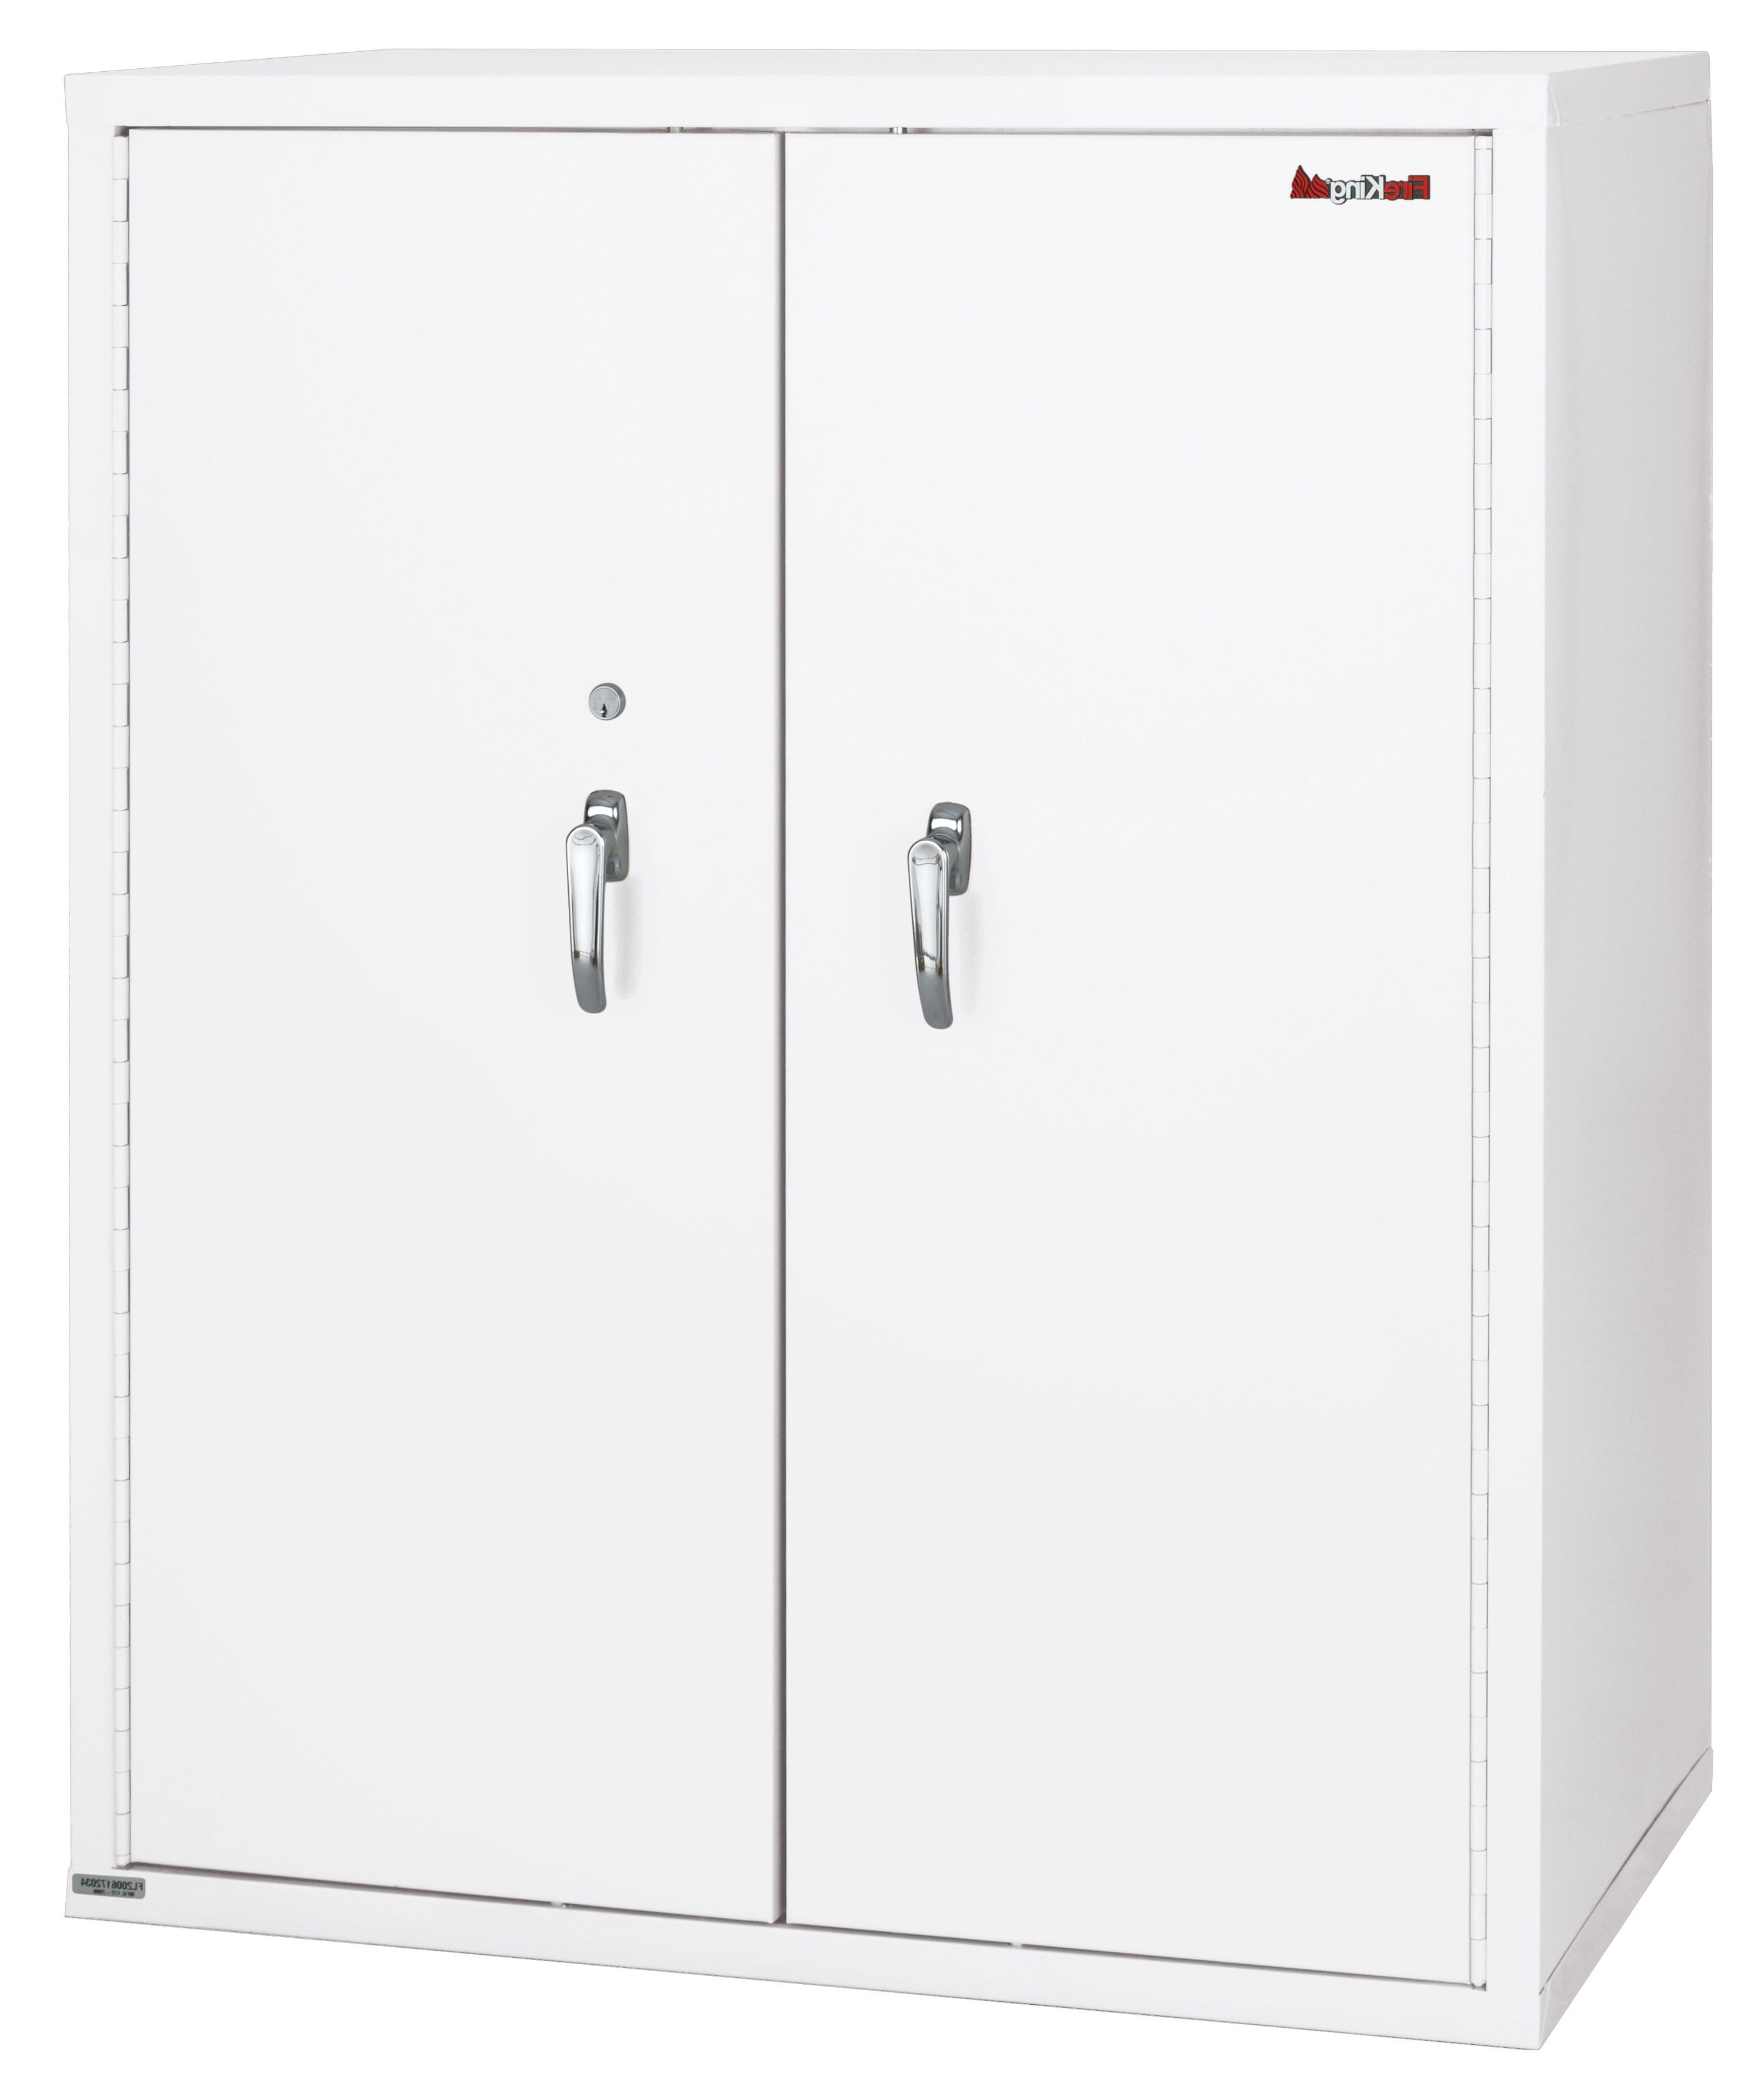 Fireking 44" Height Fireproof Storage Cabinet With Adjustable Shelves Arctic  White – Walmart Throughout Arctic White Wardrobes (Gallery 12 of 20)